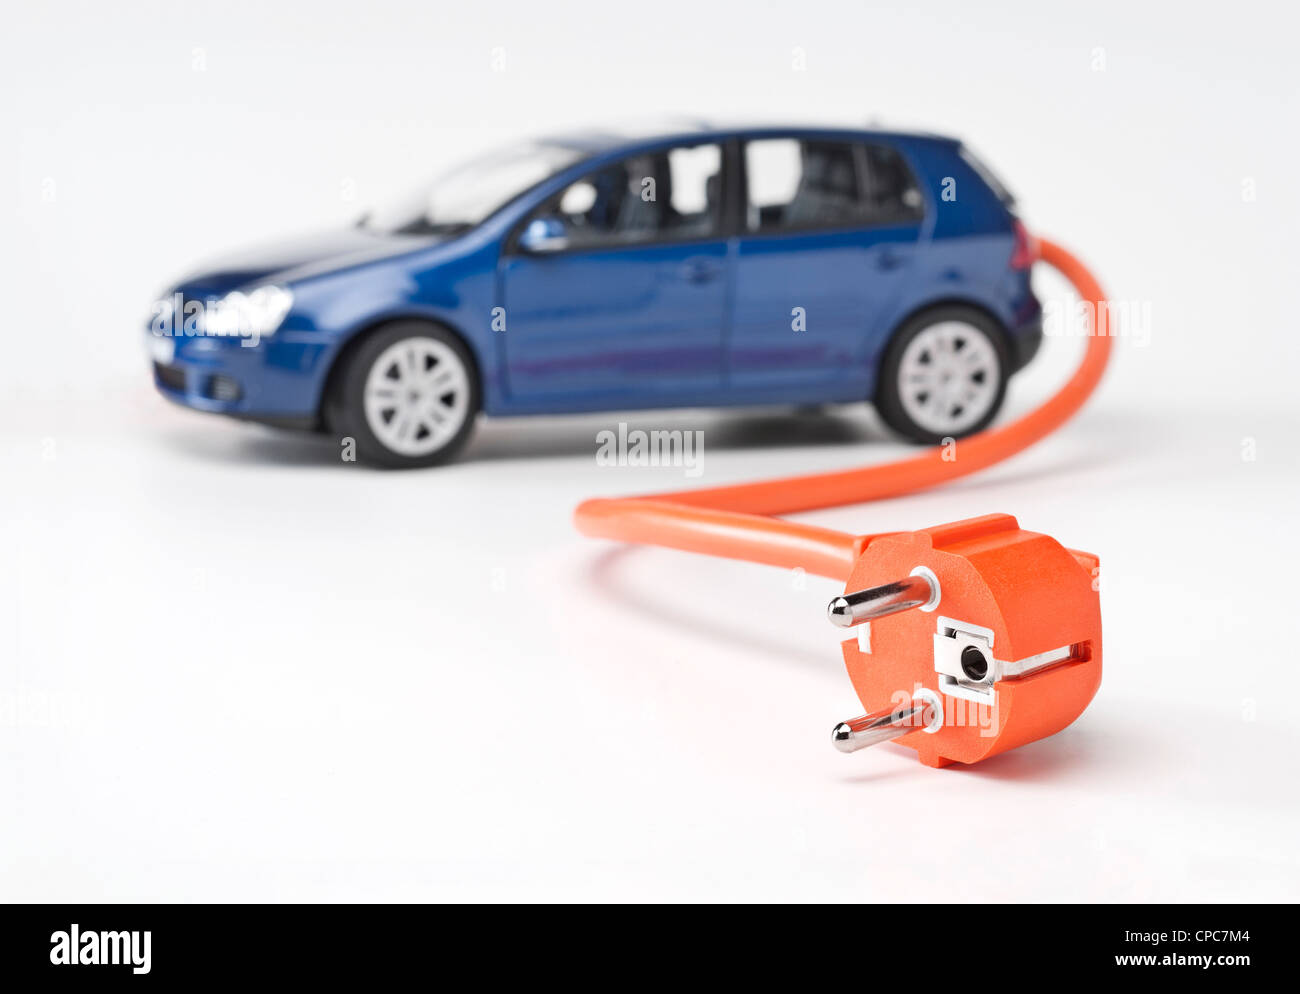 Electric car with an orange power cable. Stock Photo